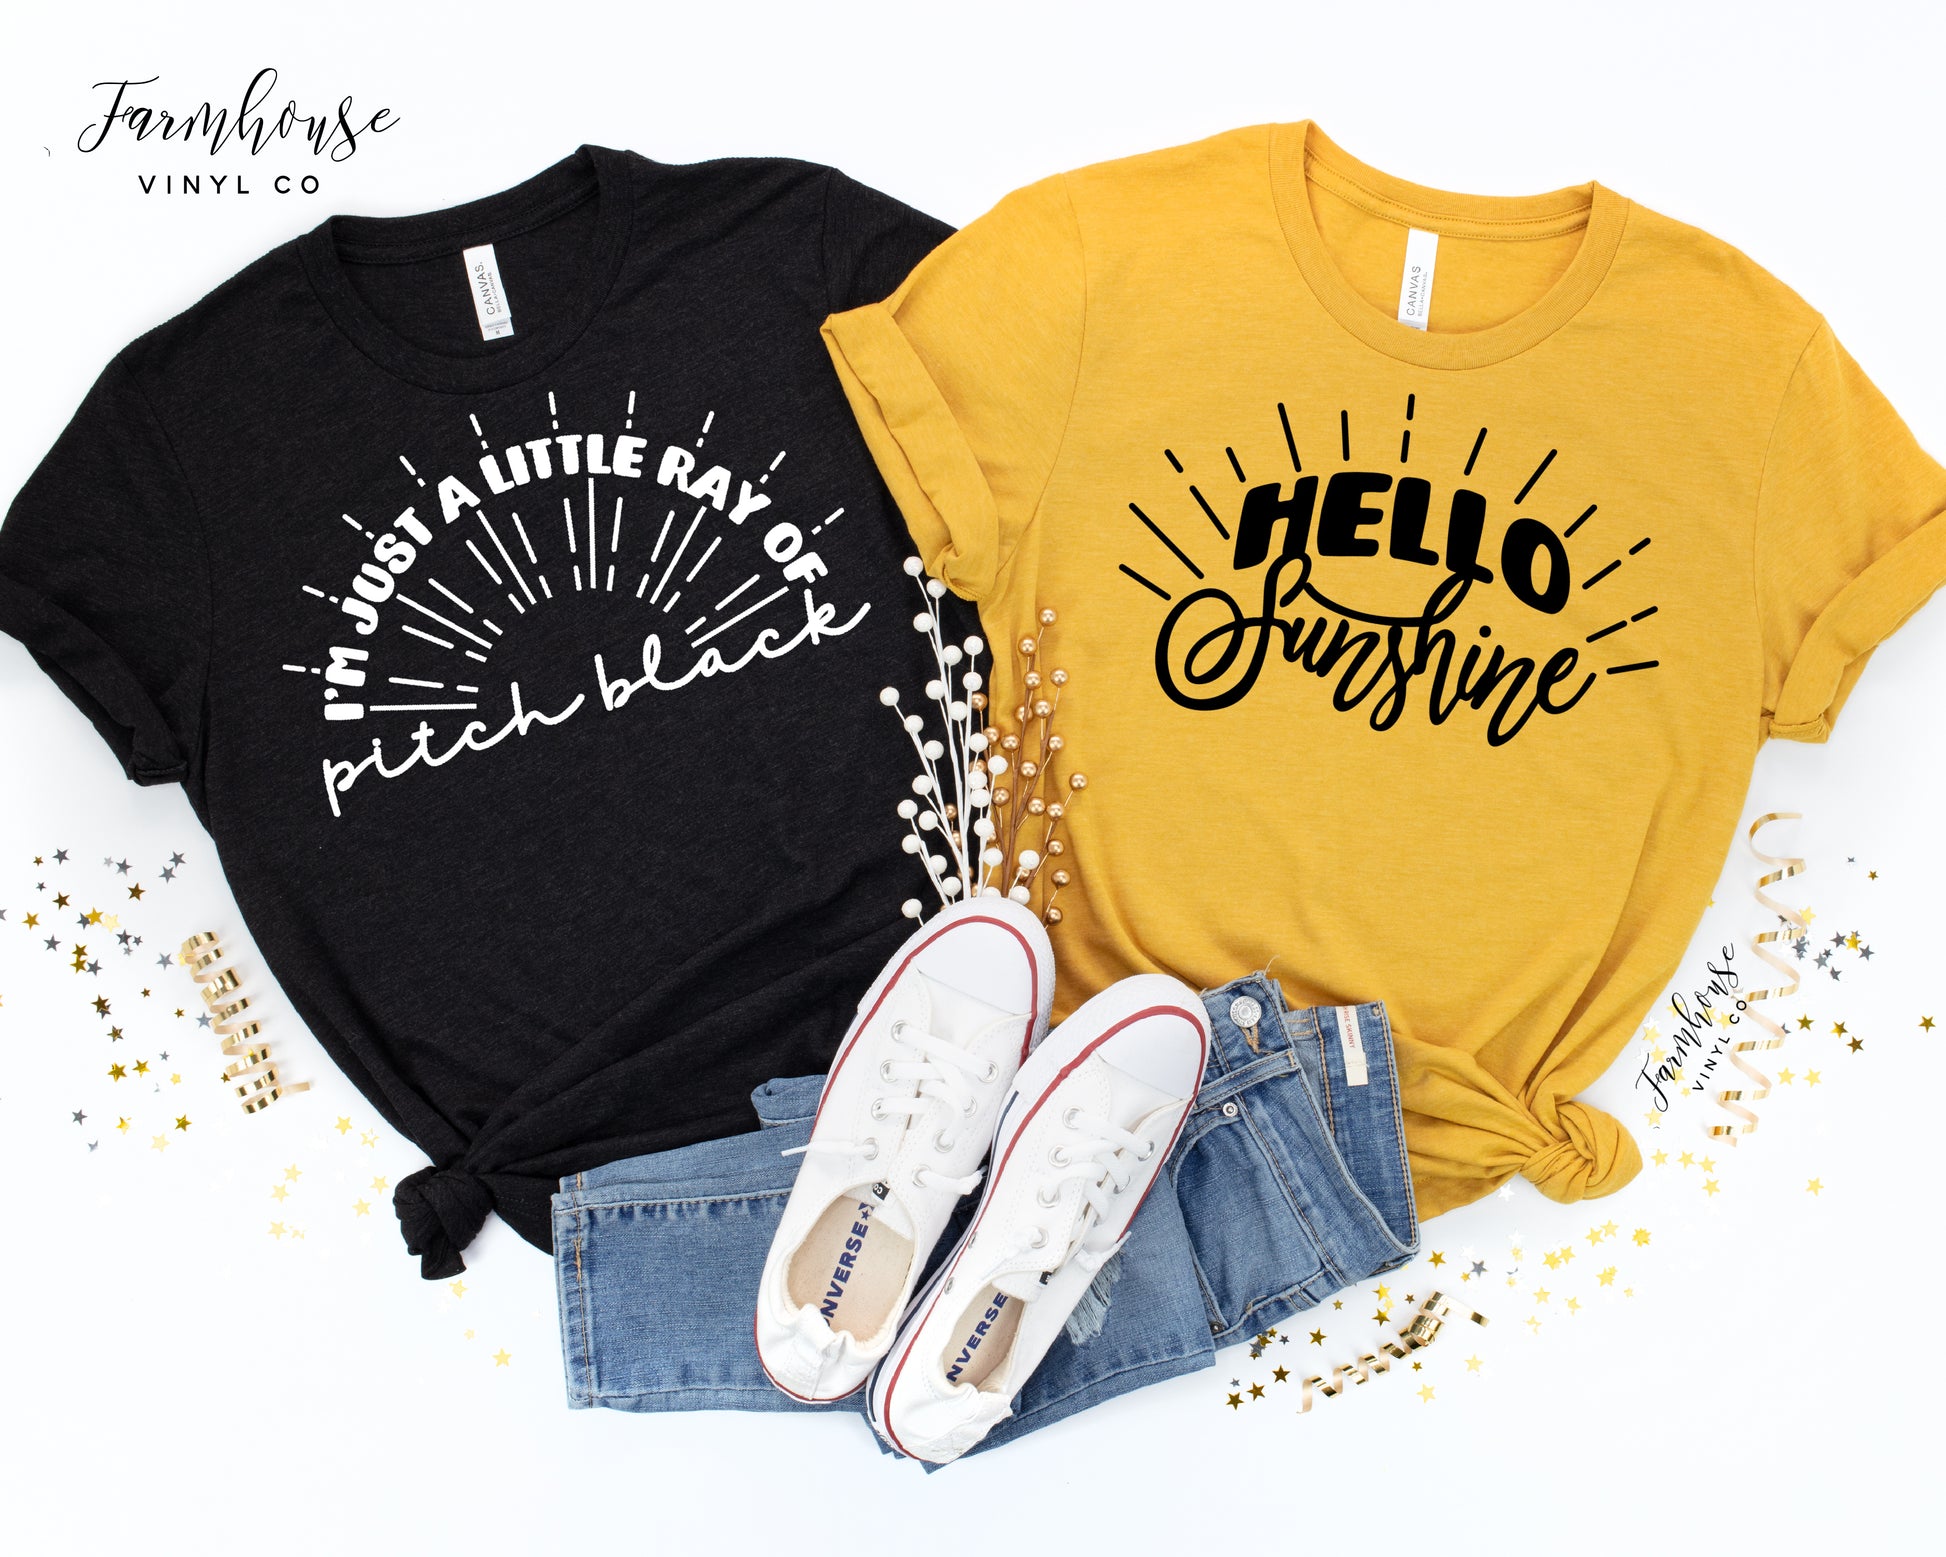 Hello Sunshine and I'm Just A Little Ray of Pitch Black Shirt - Farmhouse Vinyl Co